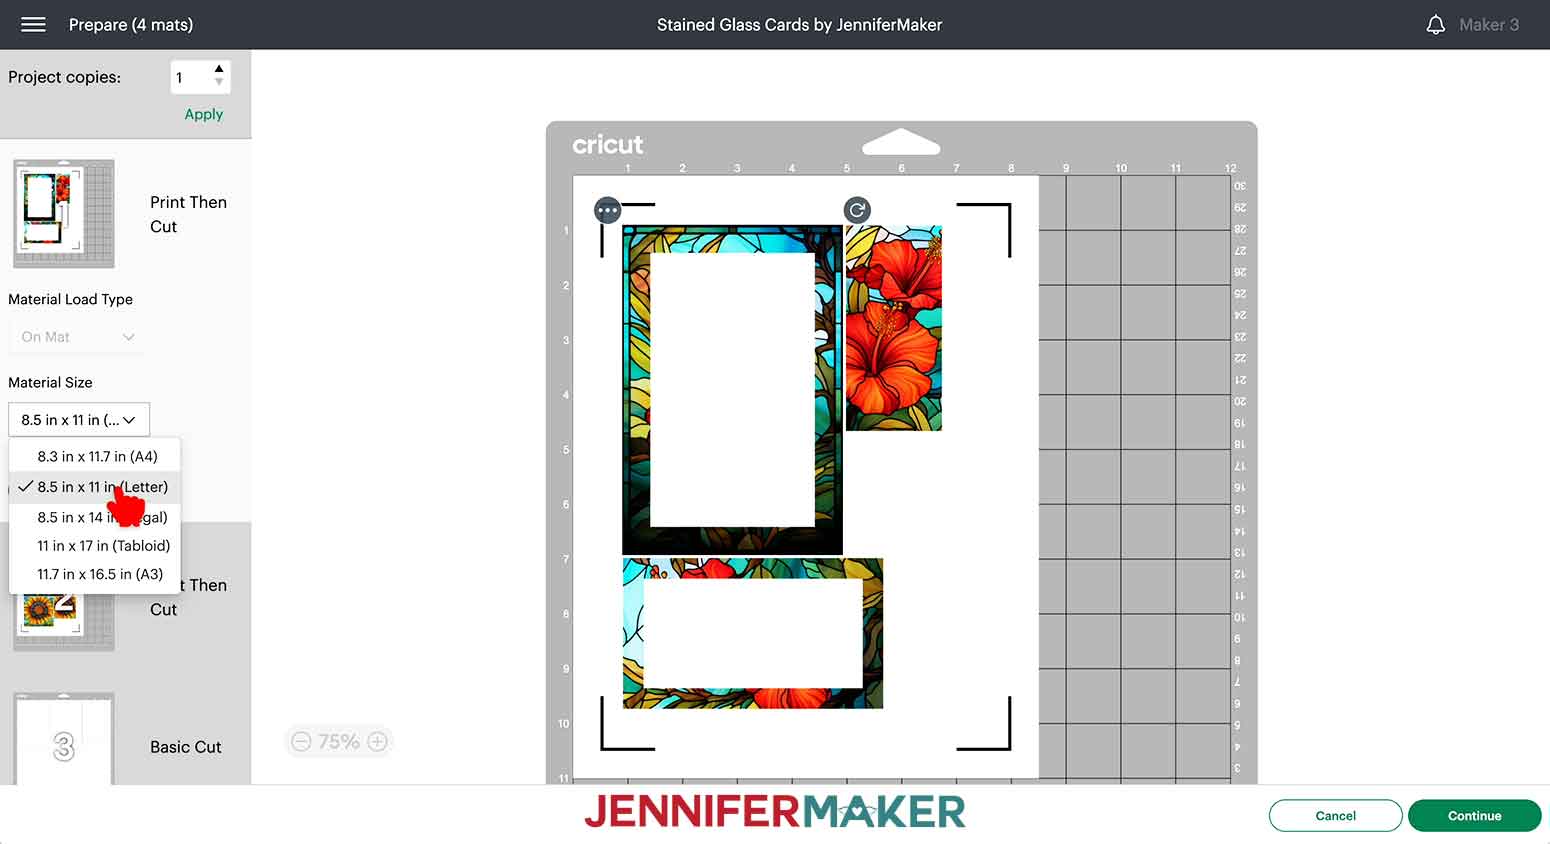 On the prepare screen, select 8.5" x 11" for the print then cut material size.